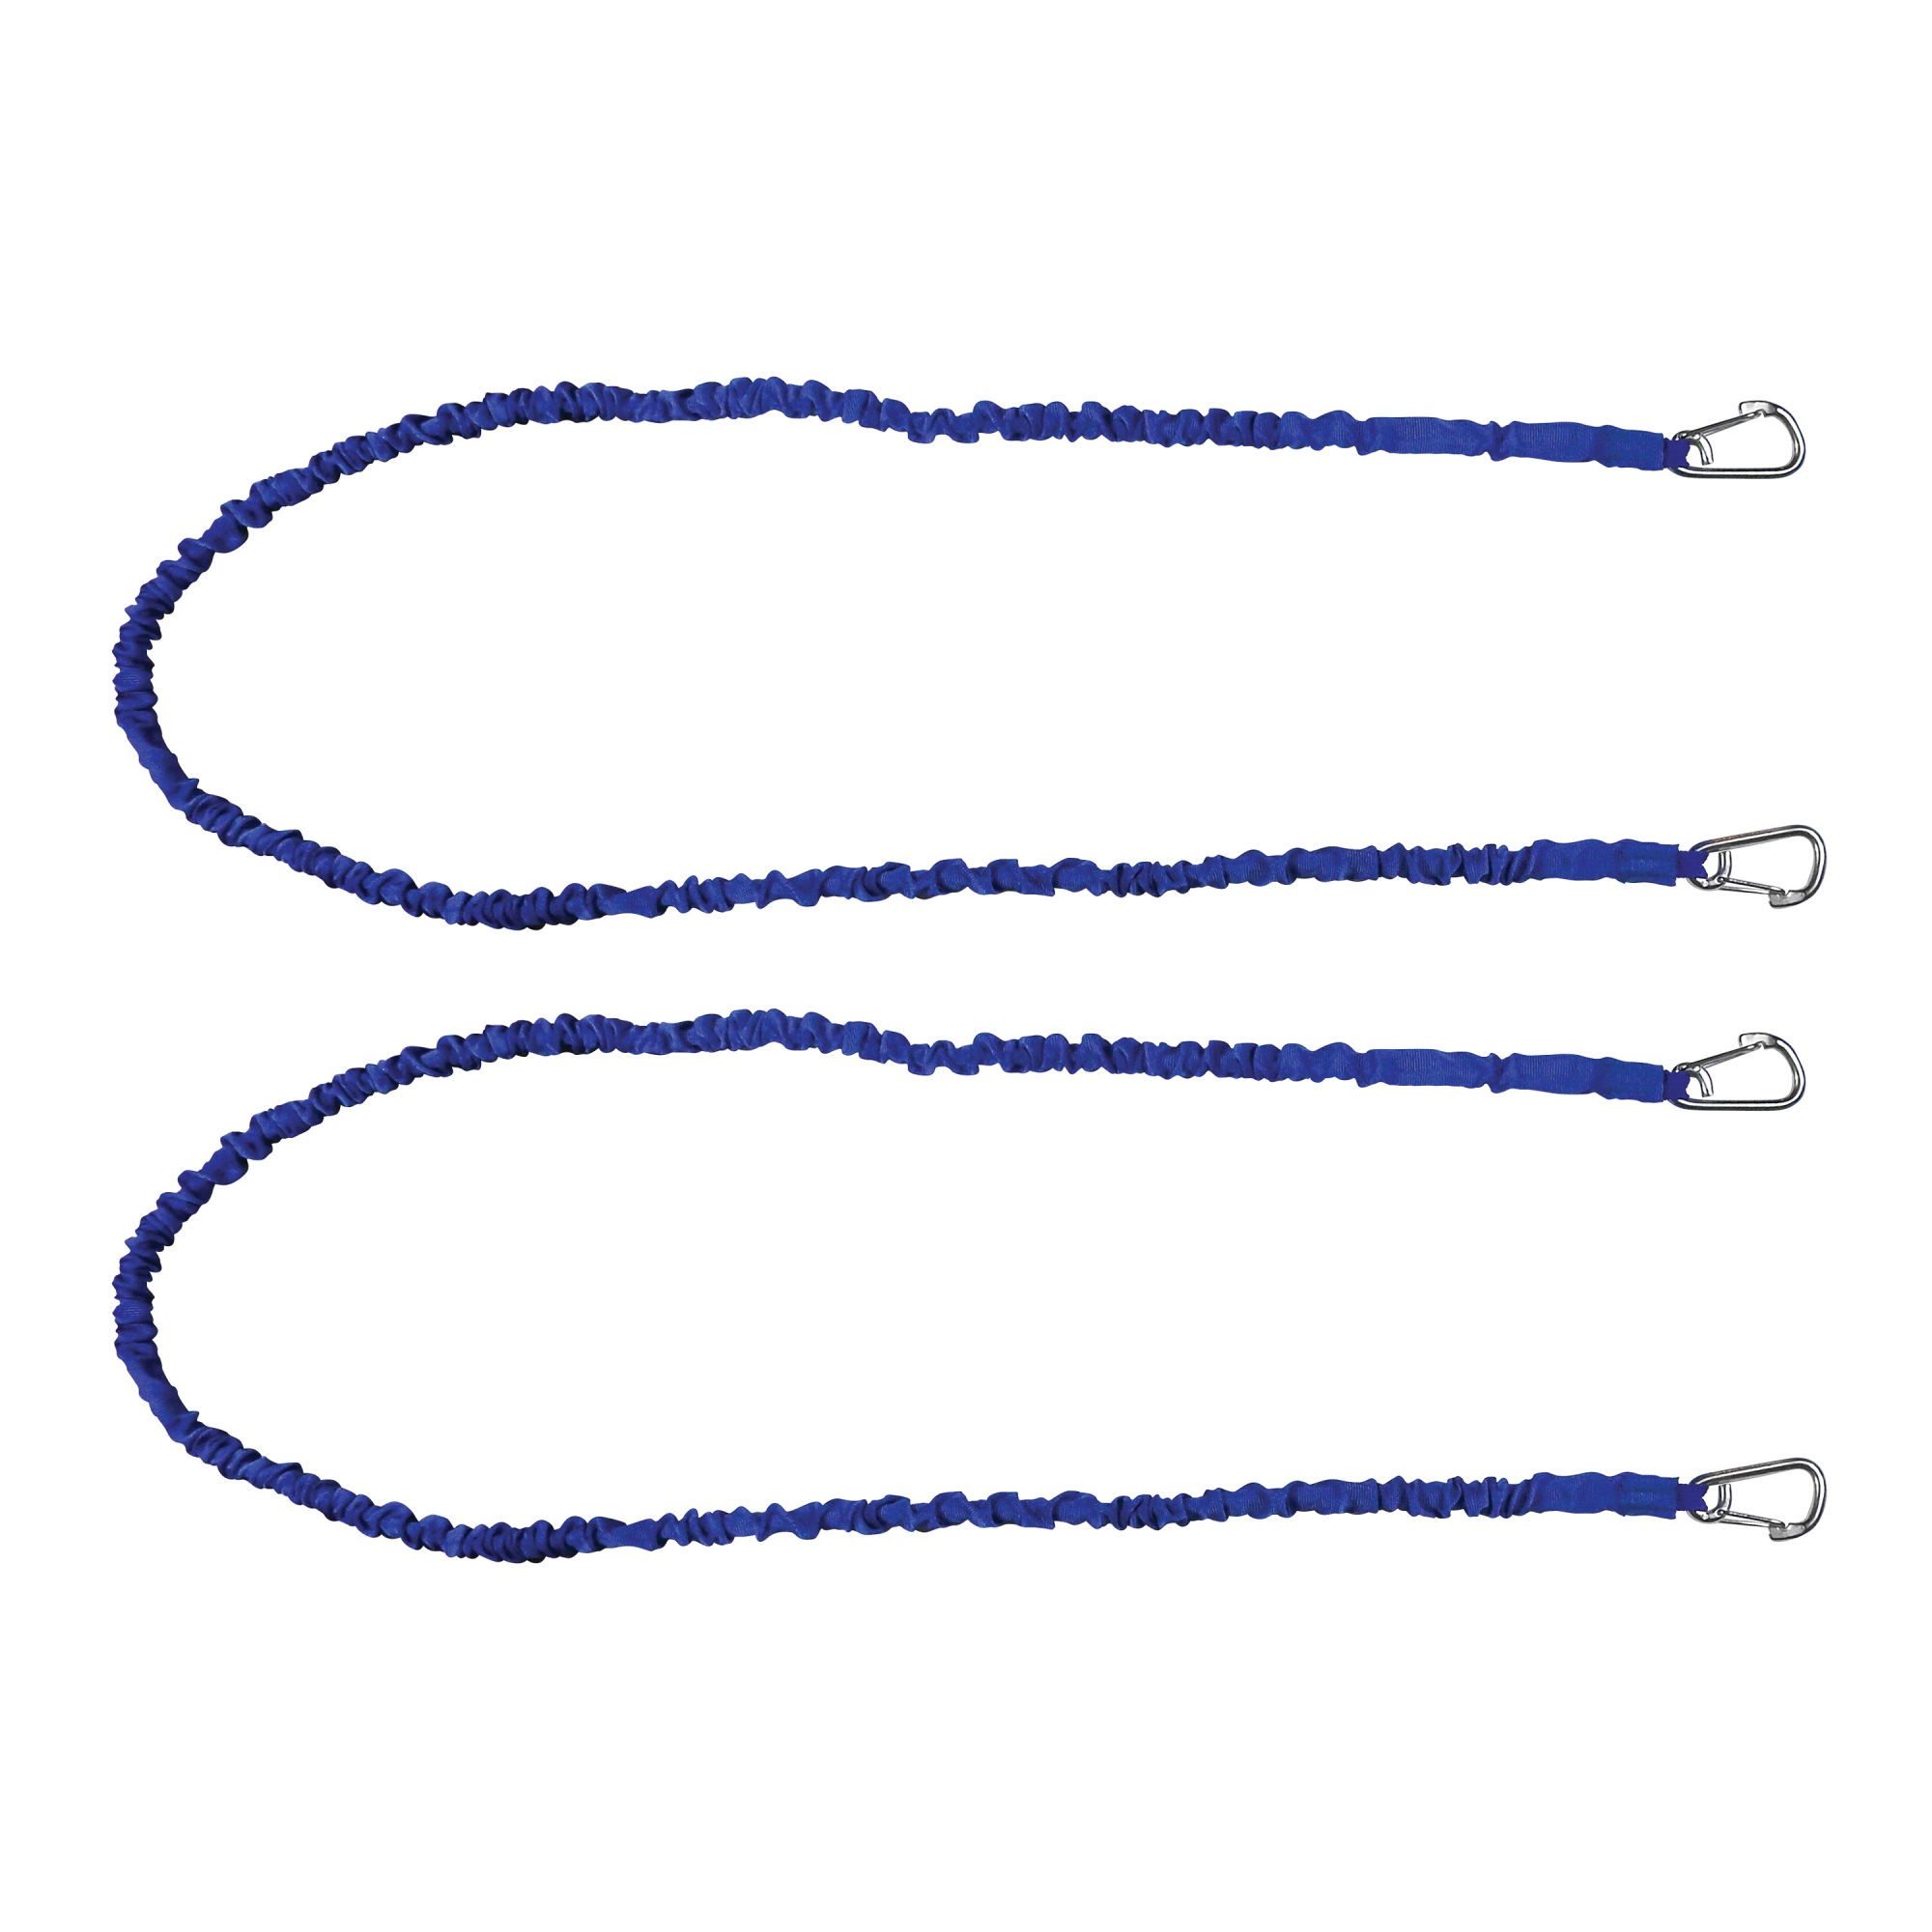 Extreme Max 3006.2918 BoatTector High-Strength Line Snubber & Storage Bungee, Value 2-Pack - 72" with Medium Hooks, Blue